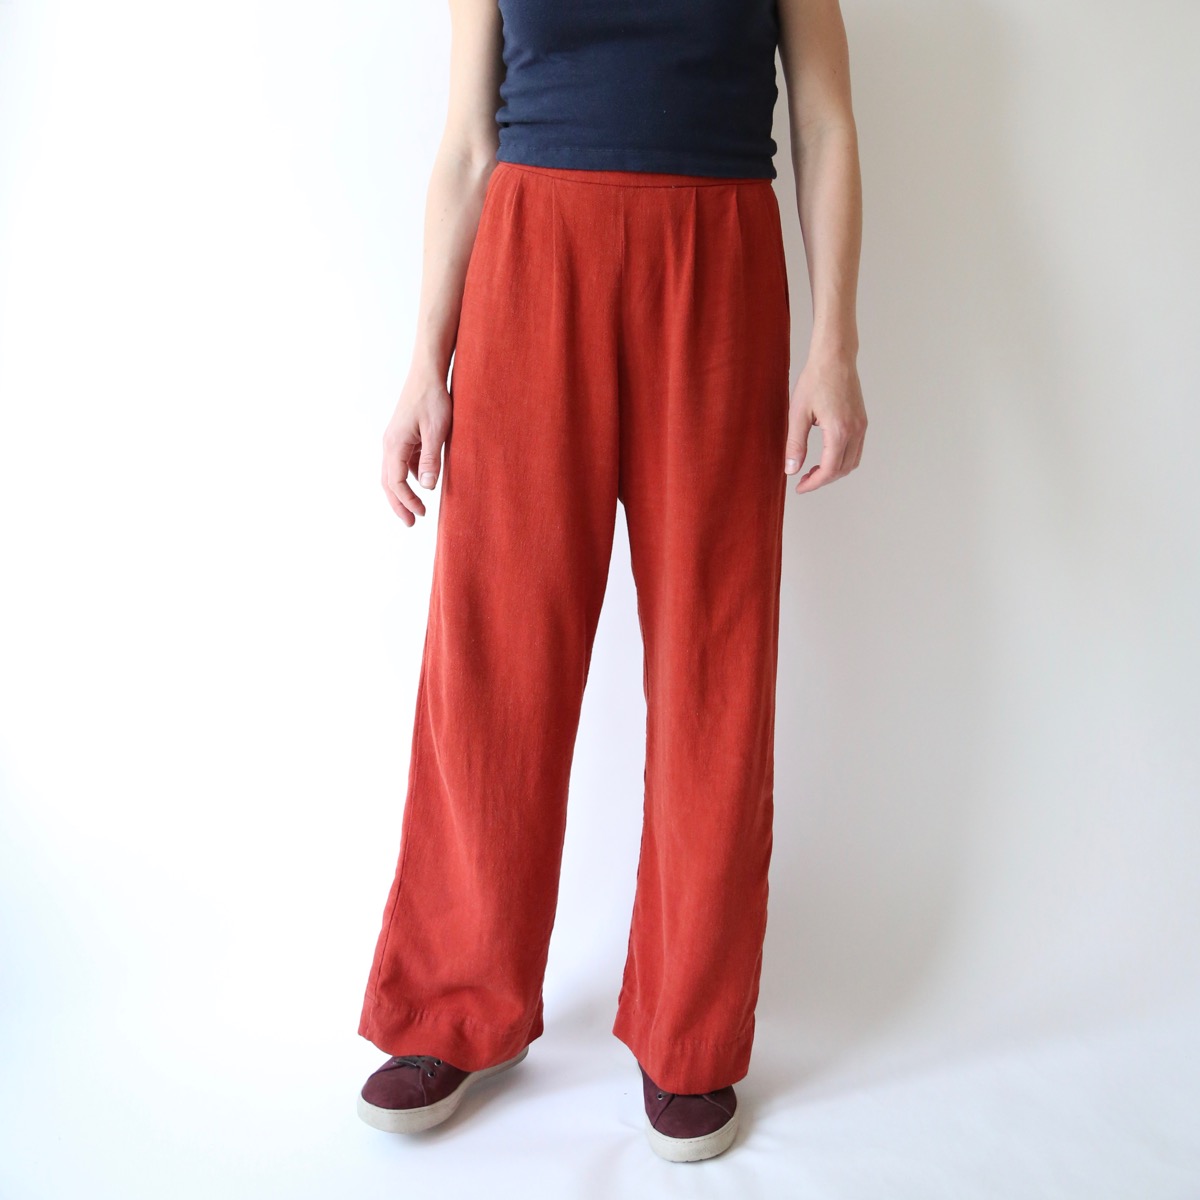 Rose Pants In Viscose Linen Made By Rae,Thai Green Curry Recipe Authentic